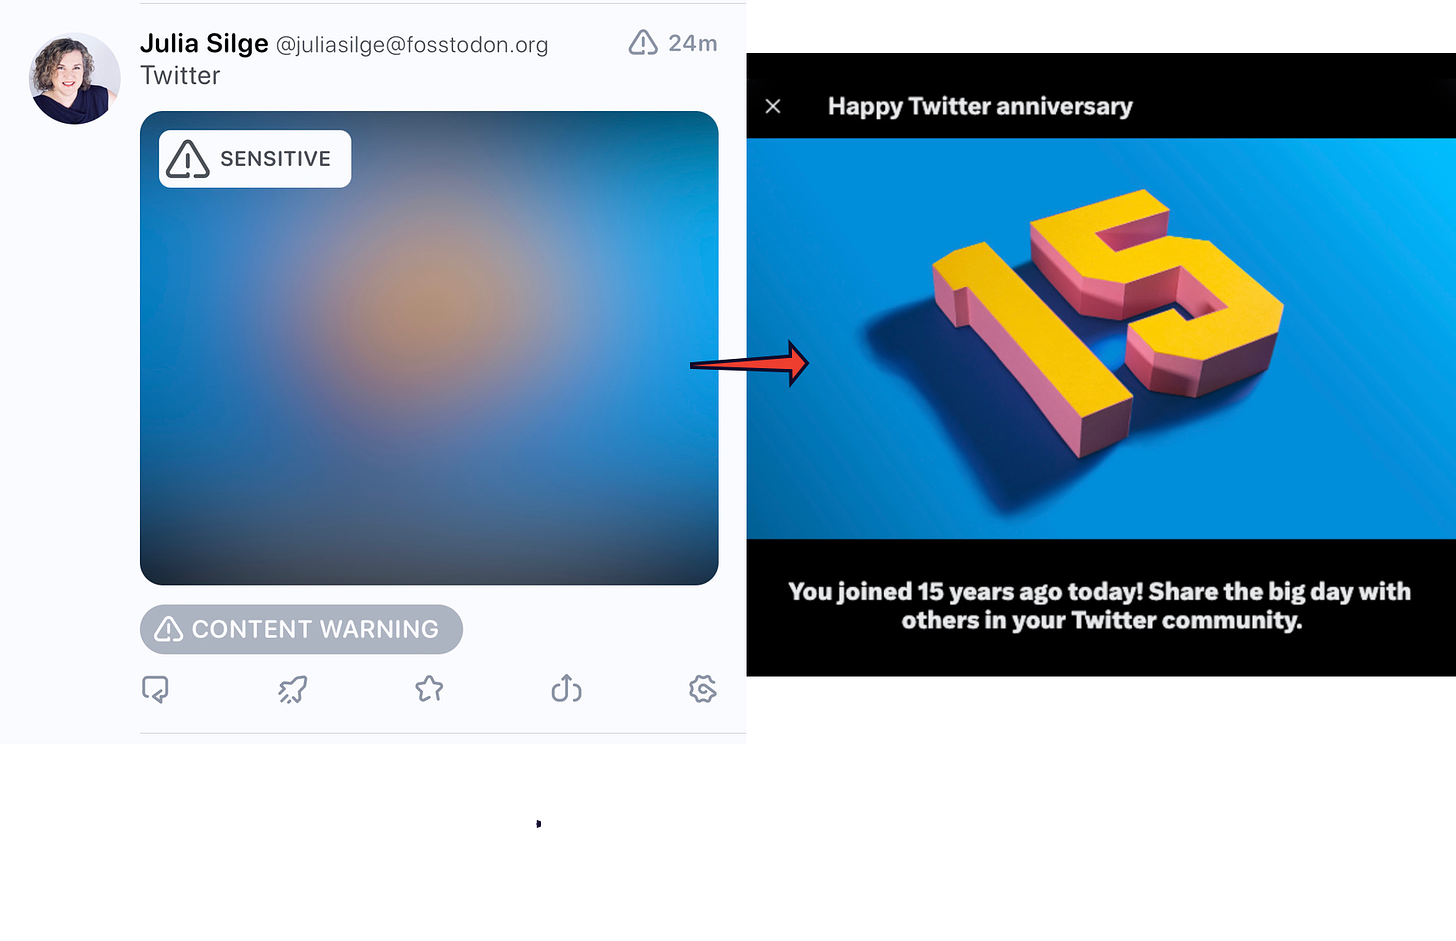 Mastodon post with a "Sensitive" label: hiding a "Happy Twitter anniversary" 